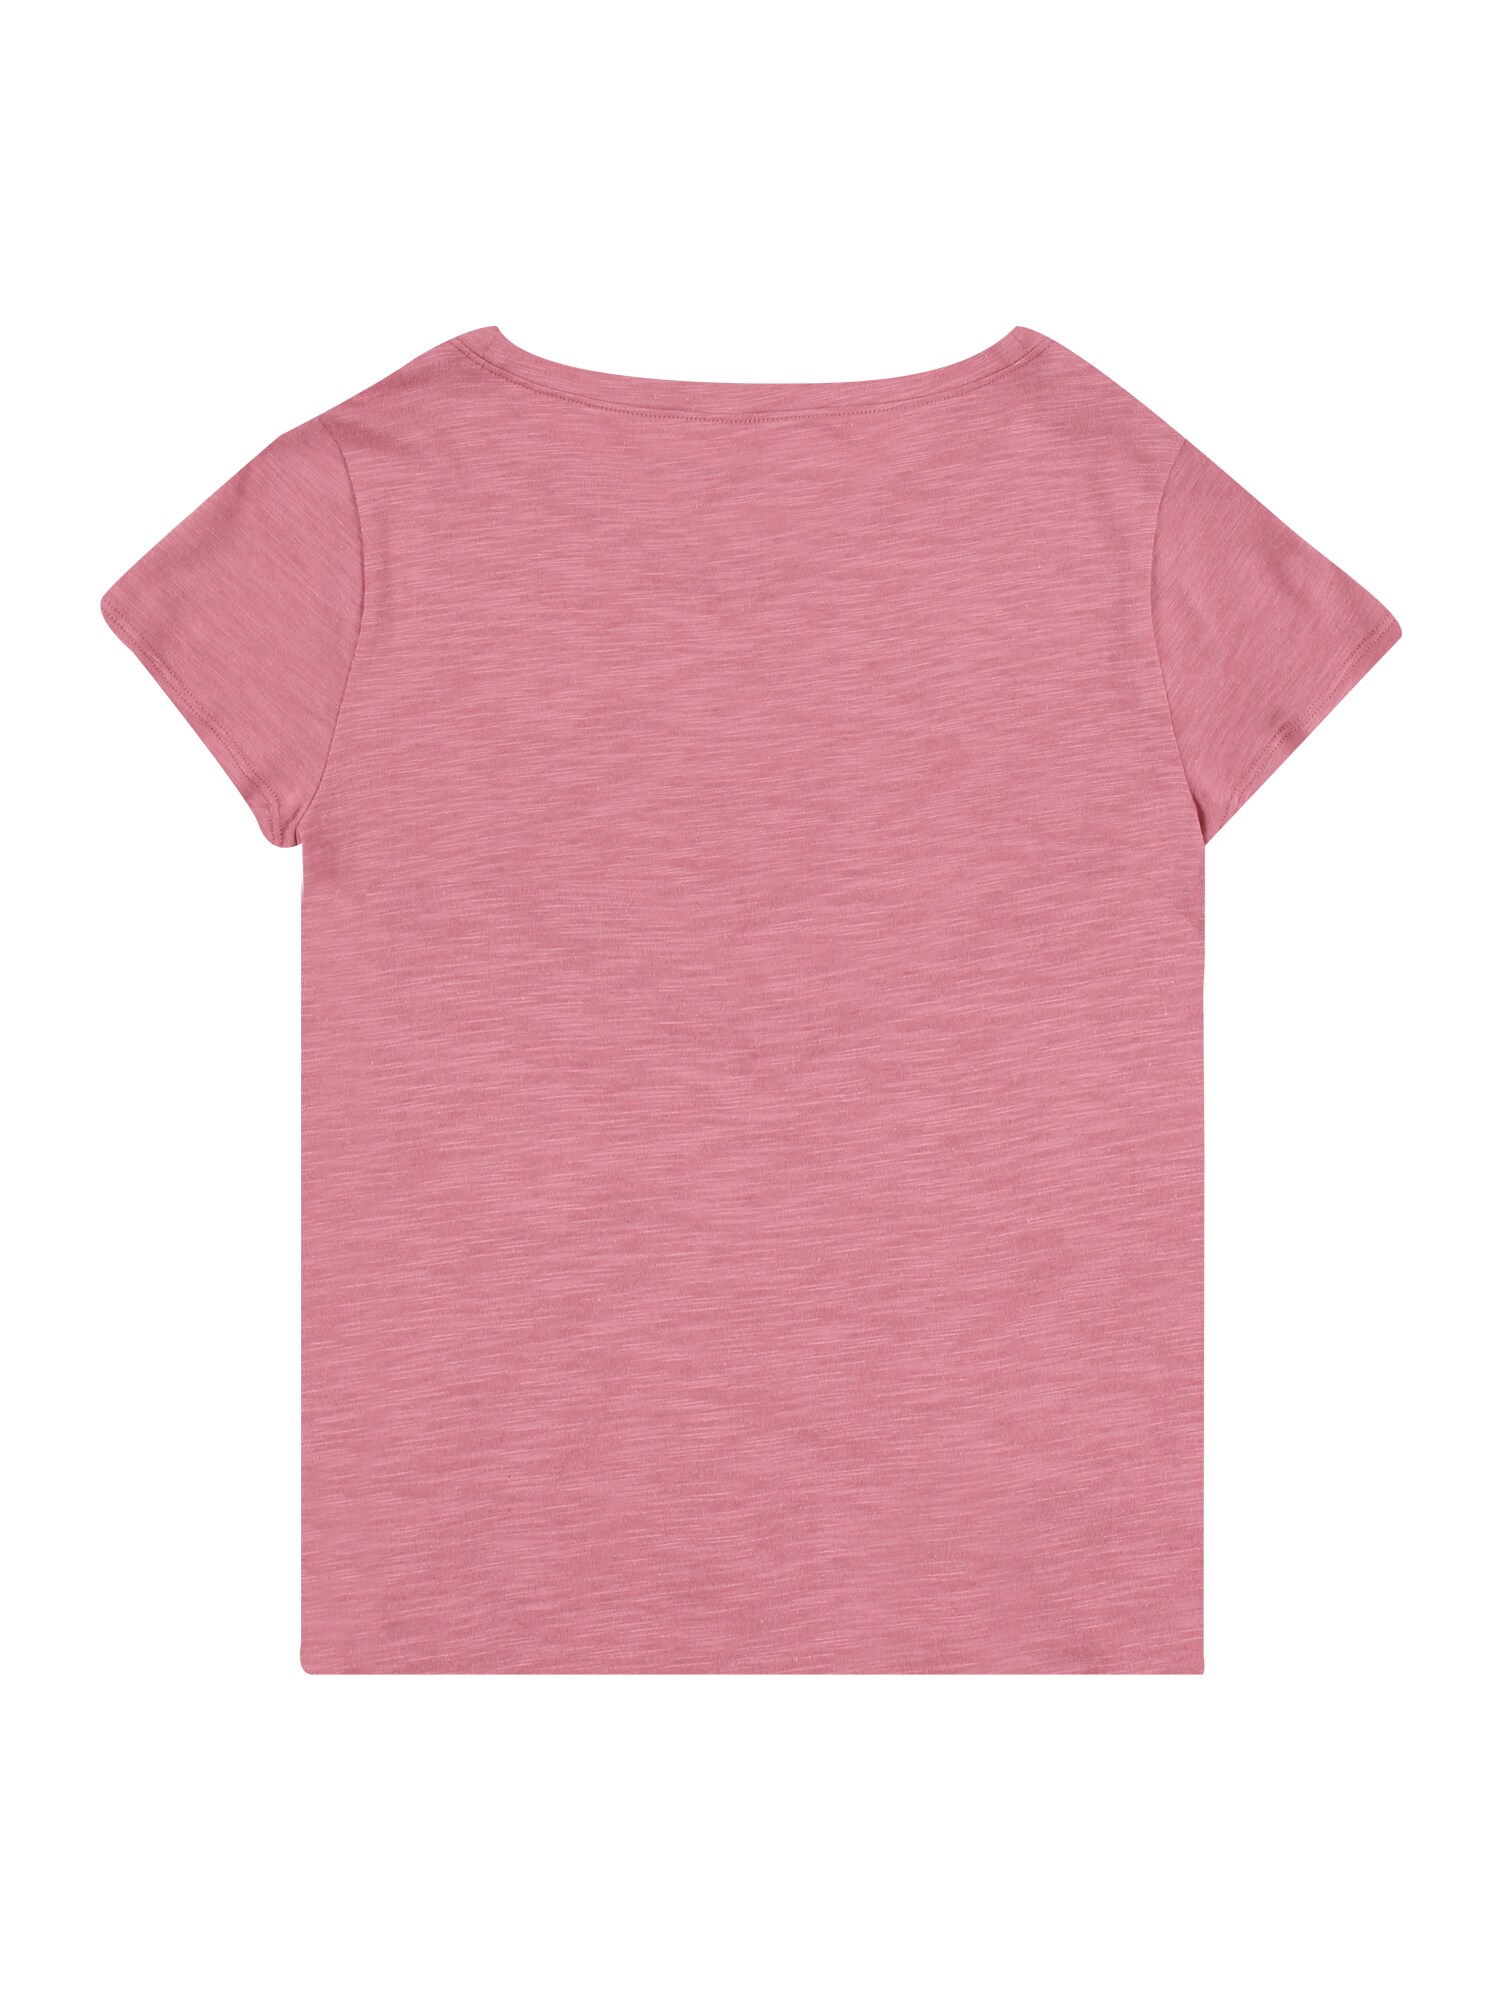 Abercrombie & Fitch Shirt  pink / black